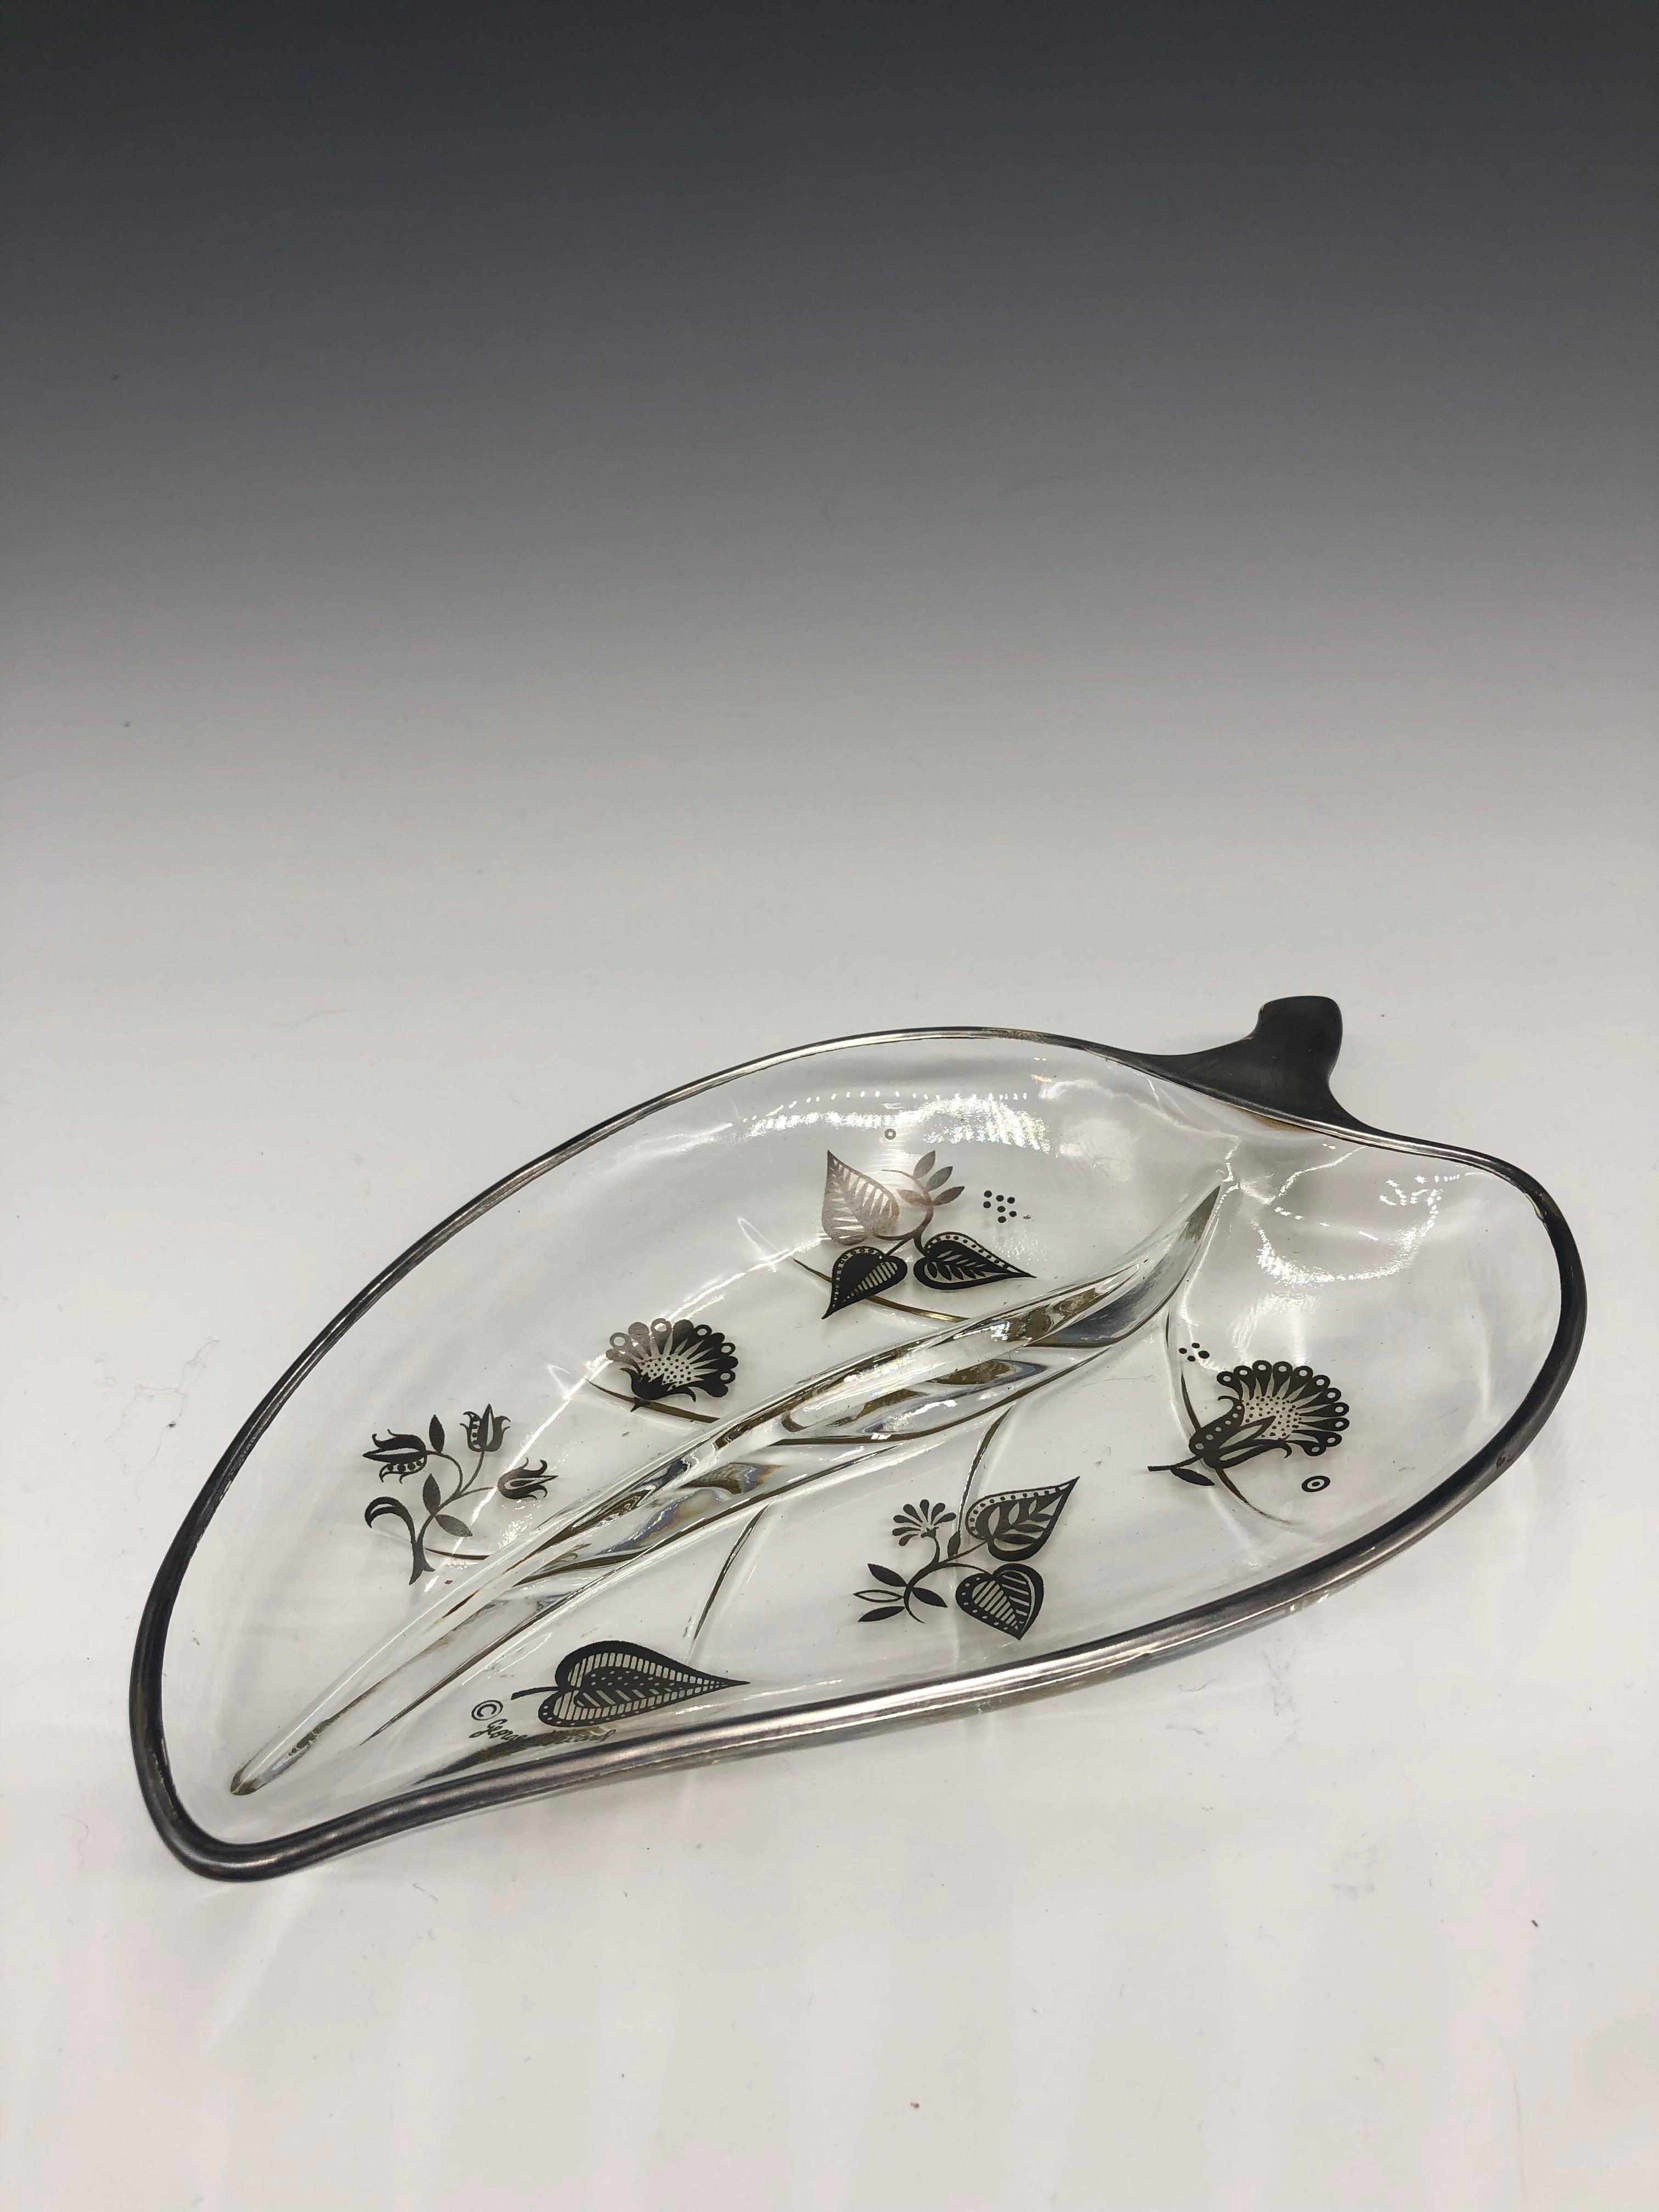 Vintage 1960s Georges Briard clear leaf shape tray/dish with silver floral detail. The piece has a divider that goes down the center. Signed lower right. It can be used as a candy, nut, relish dish, or a catch-all. 

Georges Briard was an American